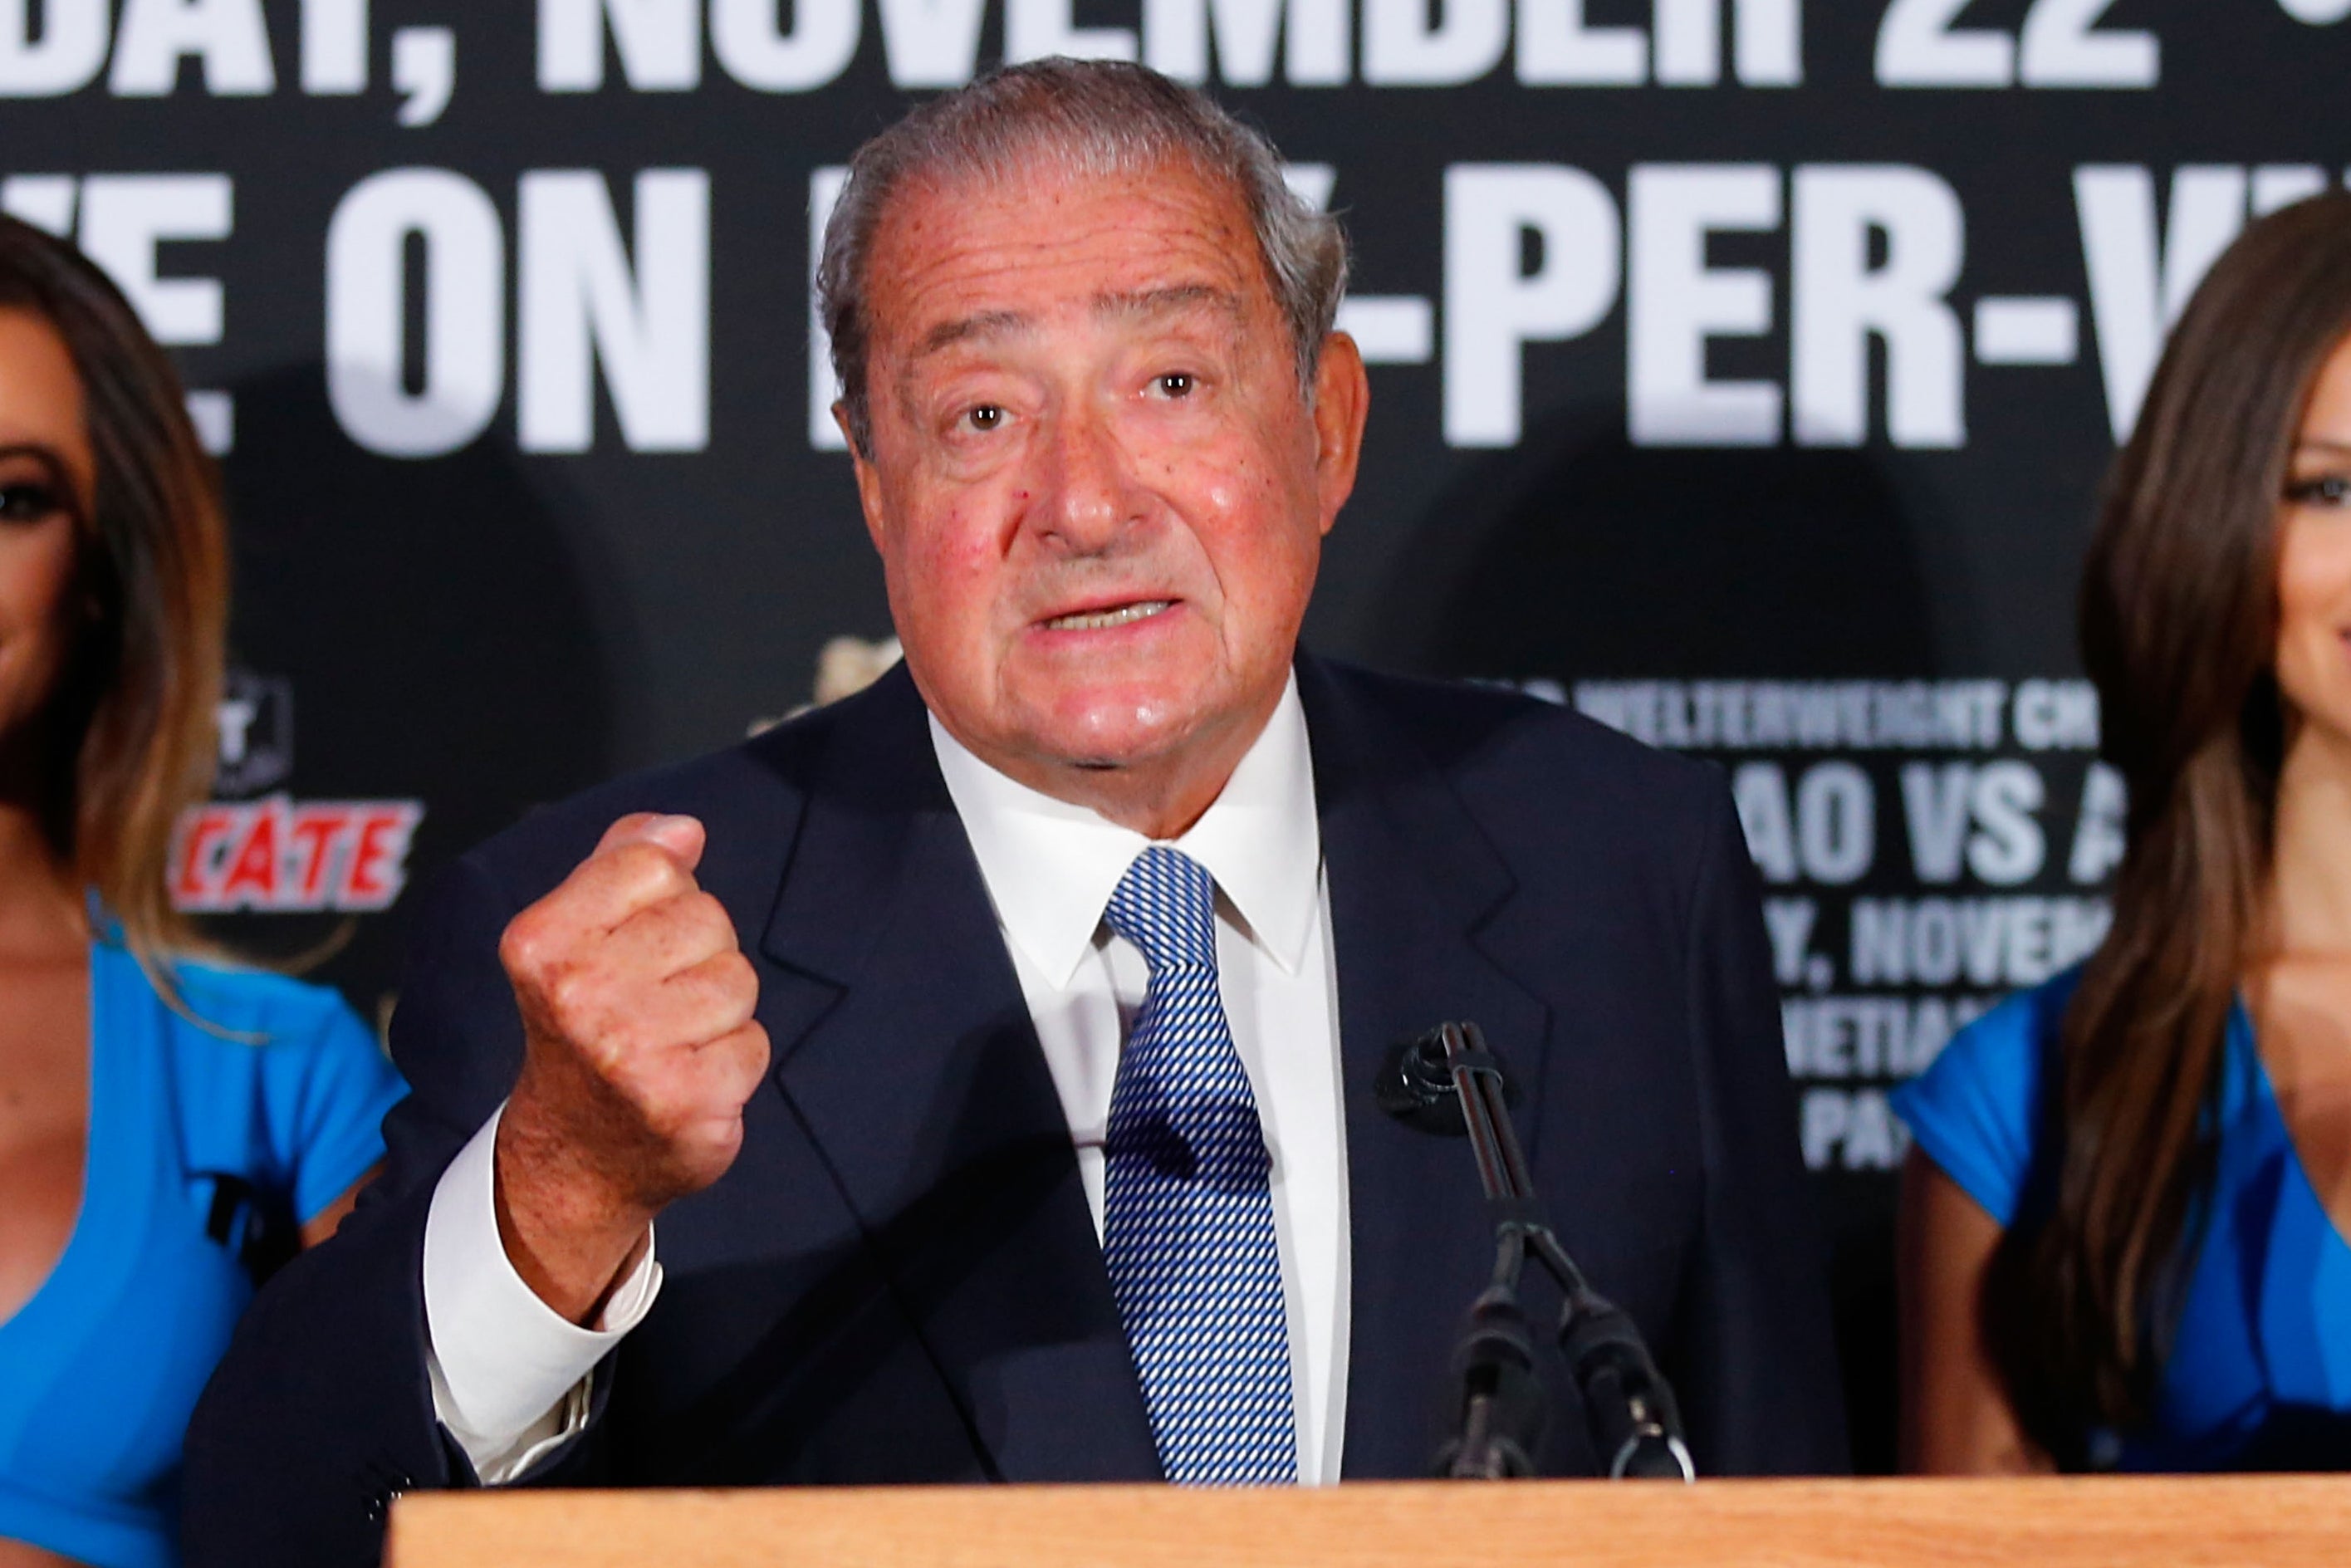 Arum at a press conference in New York City in 2014